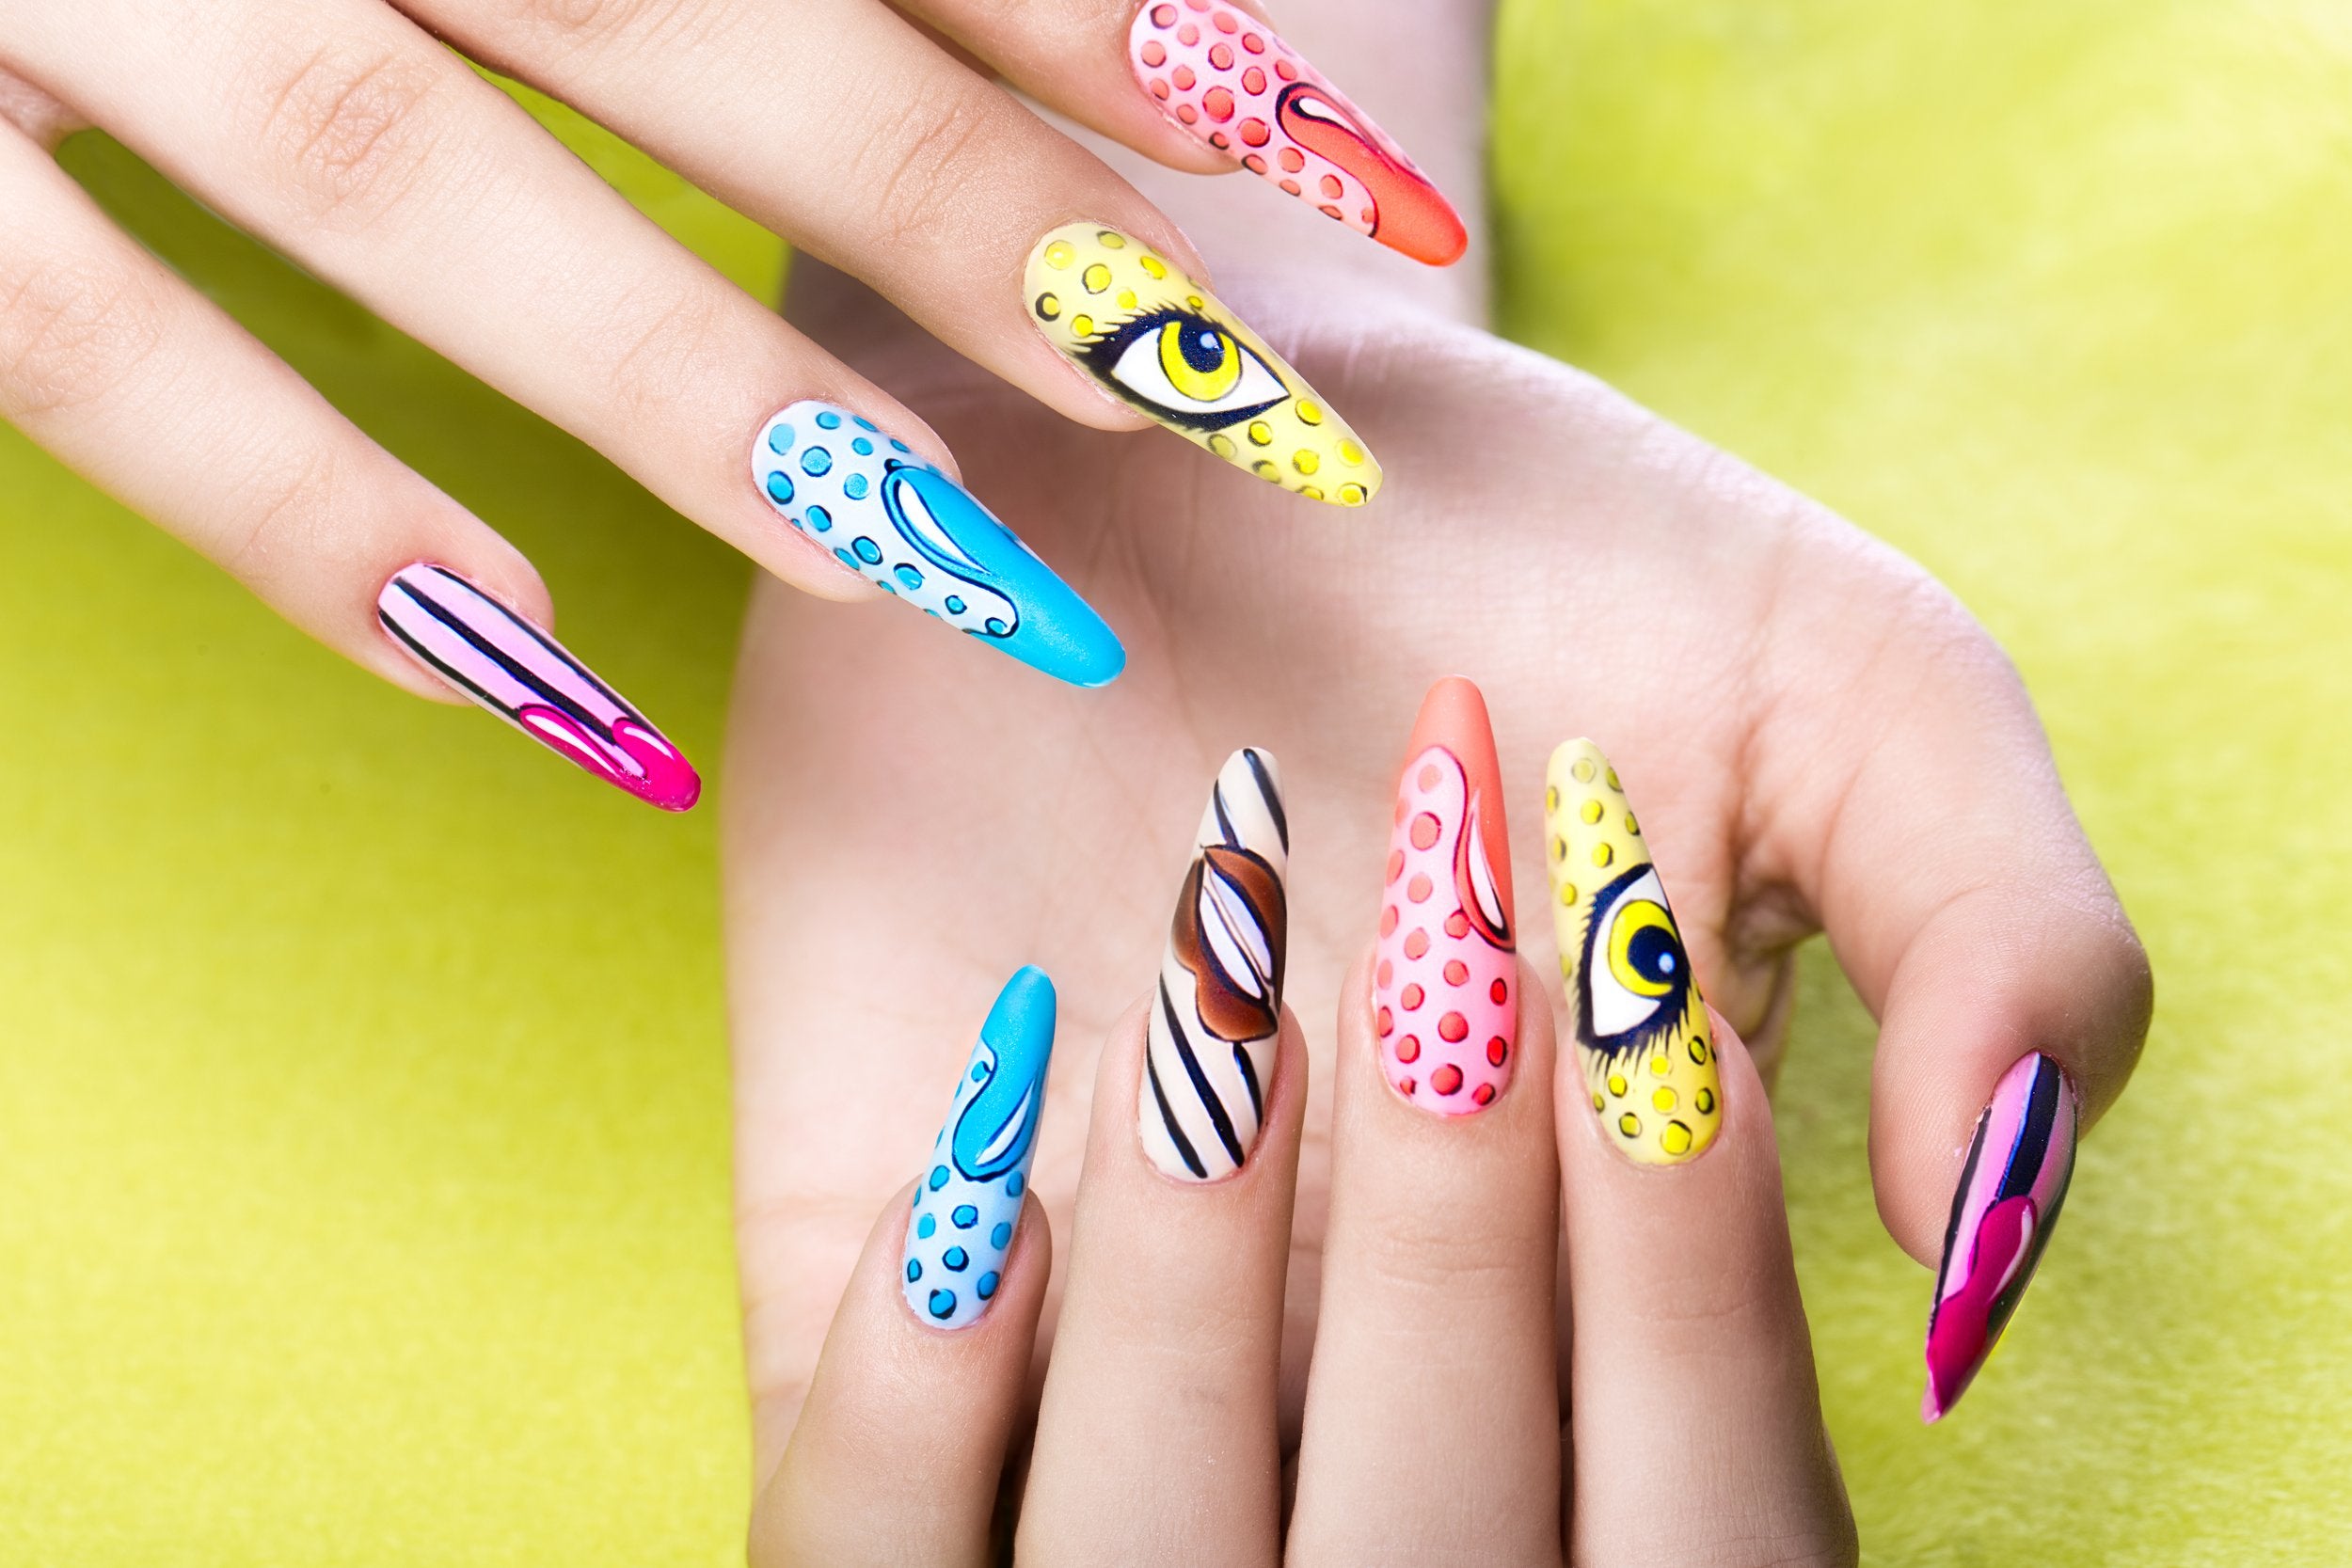 DIY Nail Art Made Simple: Creative Ideas and Tweexy Tools for Stunning Designs